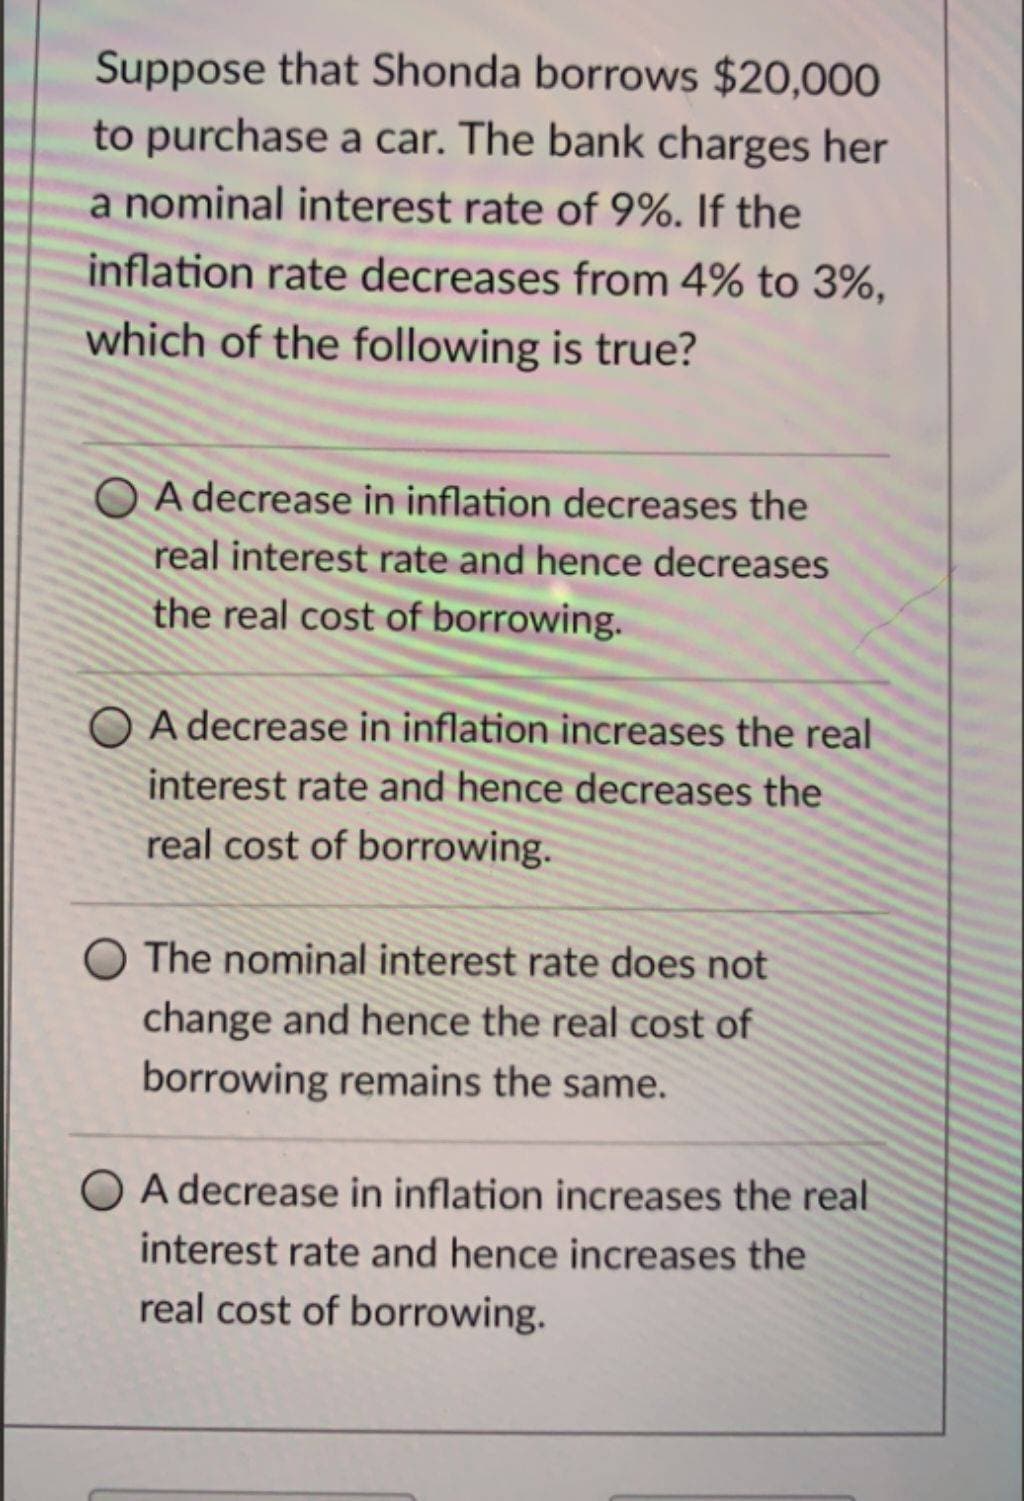 Suppose that Shonda borrows $20,000
to purchase a car. The bank charges her
a nominal interest rate of 9%. If the
inflation rate decreases from 4% to 3%,
which of the following is true?
OA decrease in inflation decreases the
real interest rate and hence decreases
the real cost of borrowing.
OA decrease in inflation increases the real
interest rate and hence decreases the
real cost of borrowing.
O The nominal interest rate does not
change and hence the real cost of
borrowing remains the same.
O A decrease in inflation increases the real
interest rate and hence increases the
real cost of borrowing.